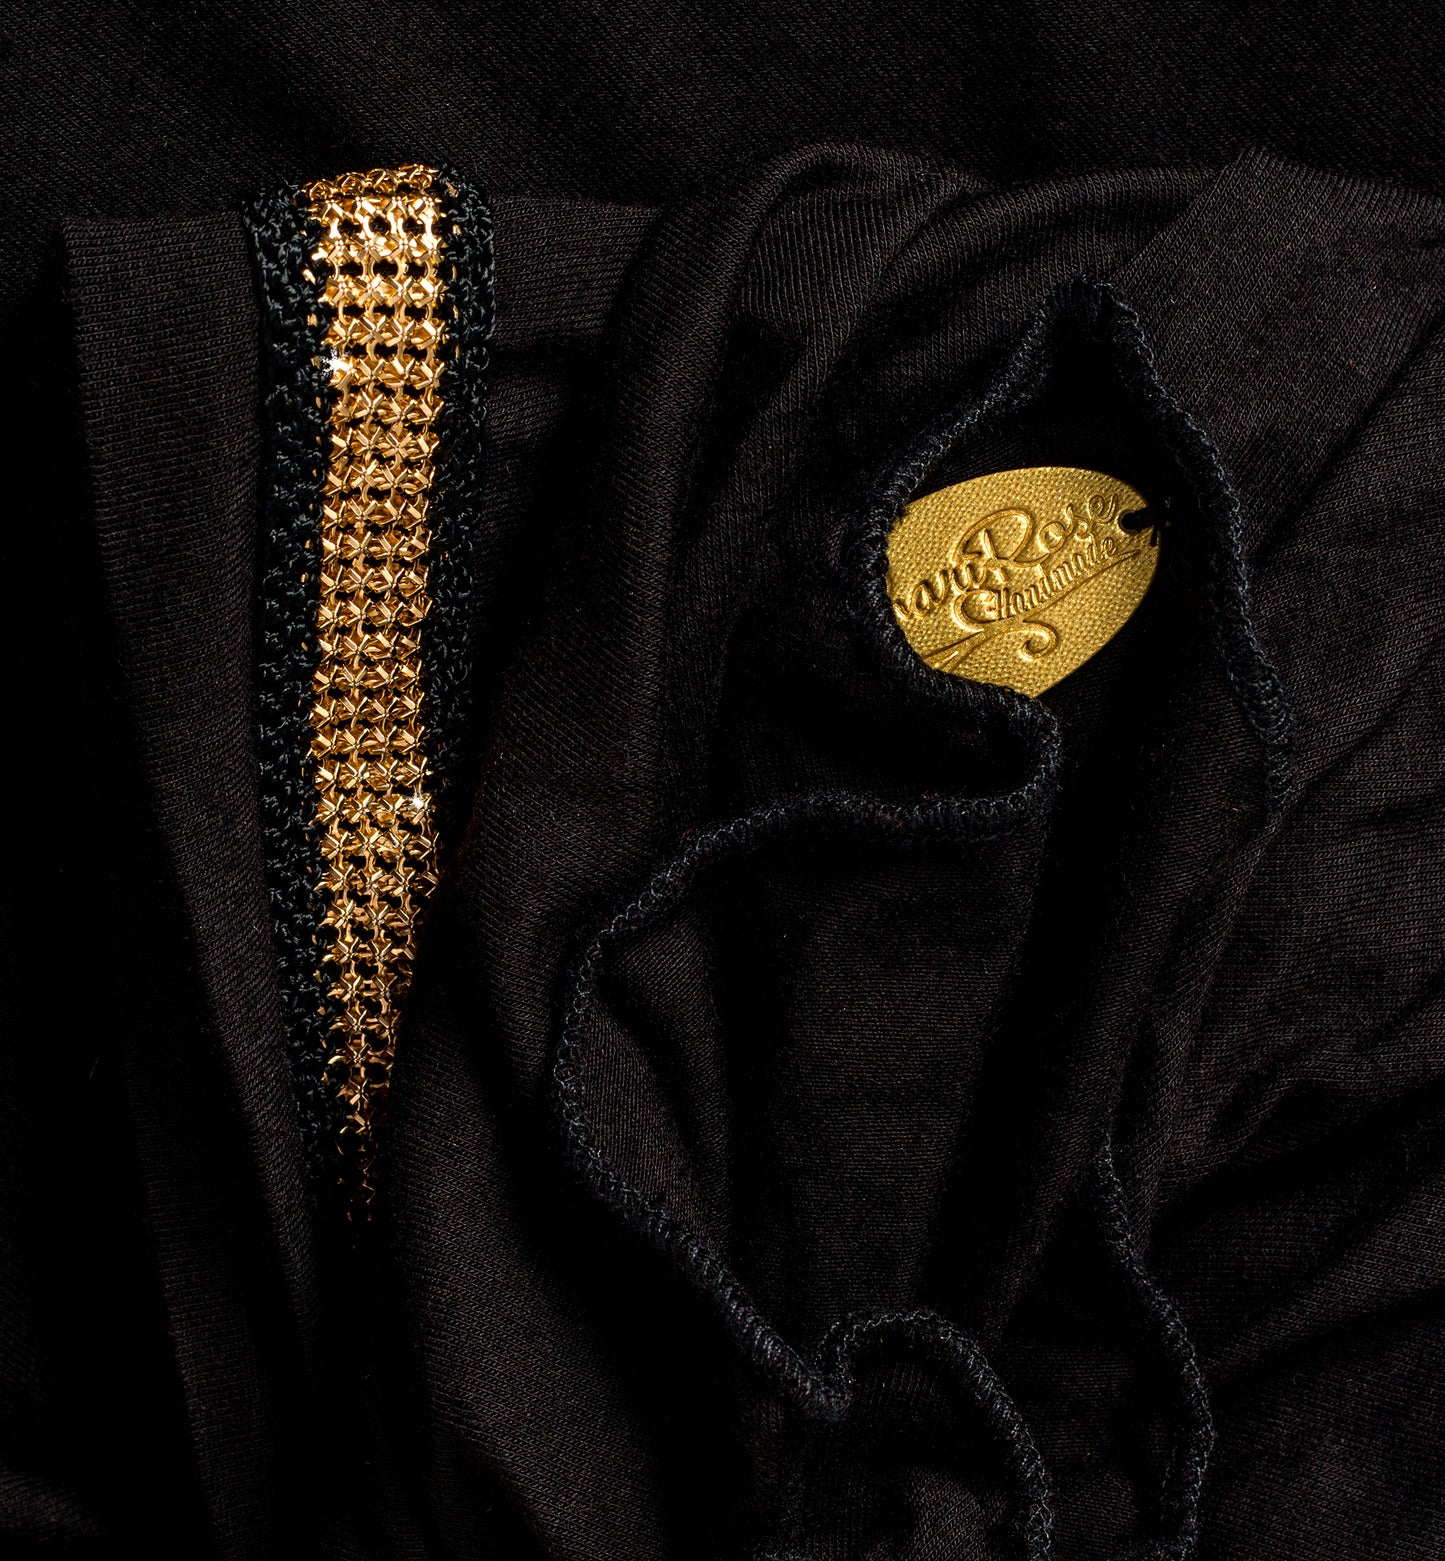 Black headscarf with gold sparkly metal trim